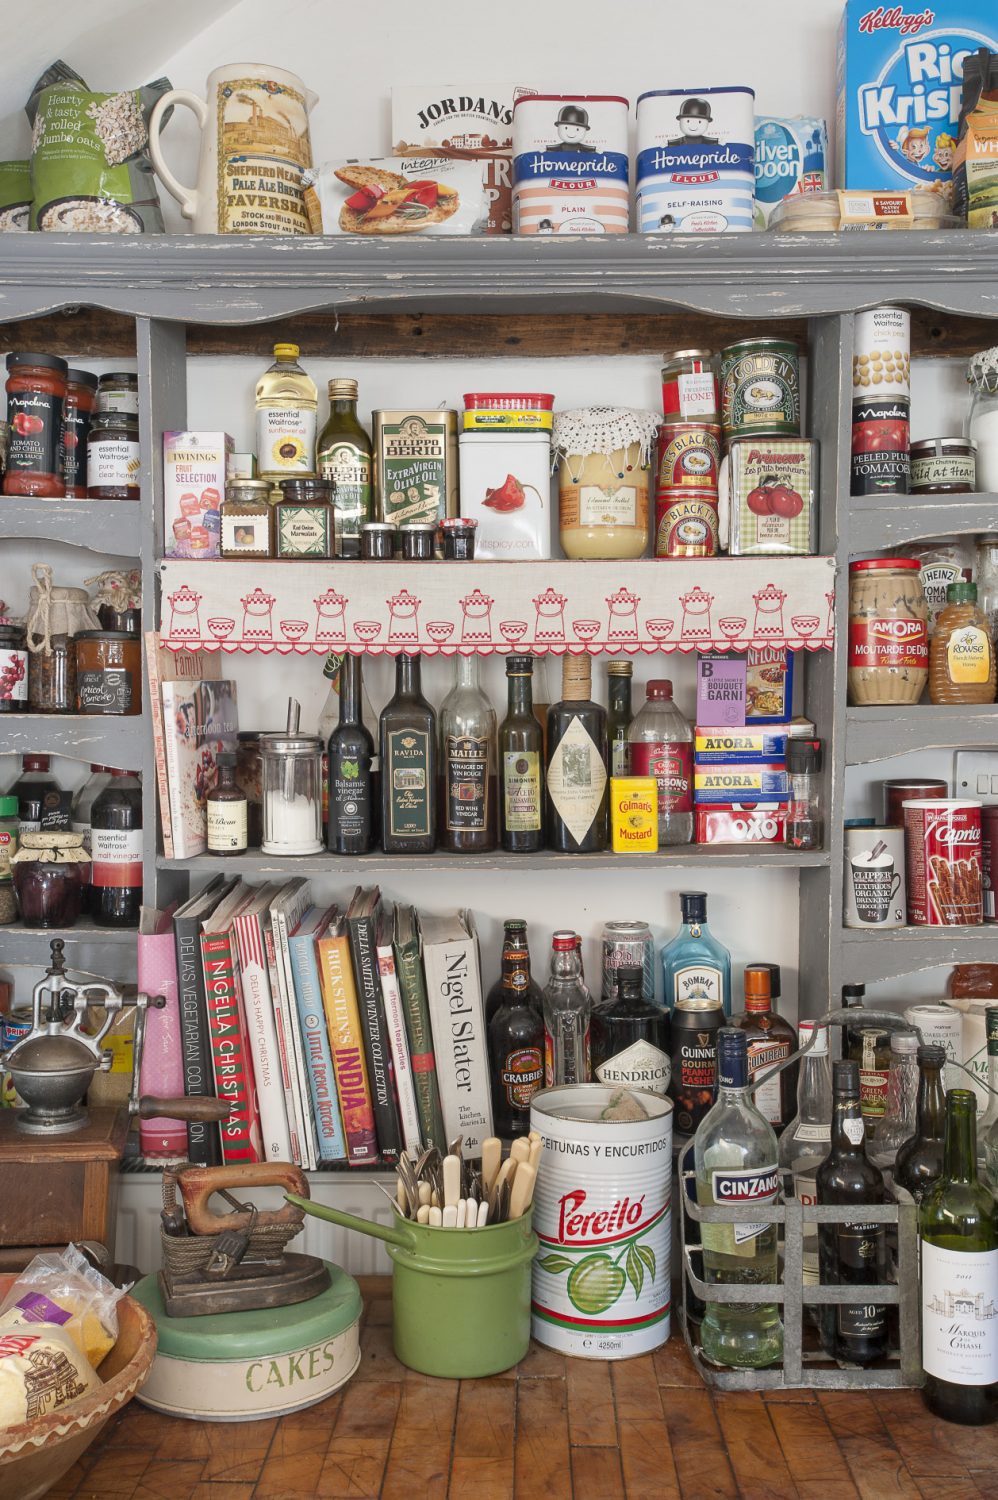 generously stocked shelves ensure that ingredients and cookbooks are always conveniently to hand